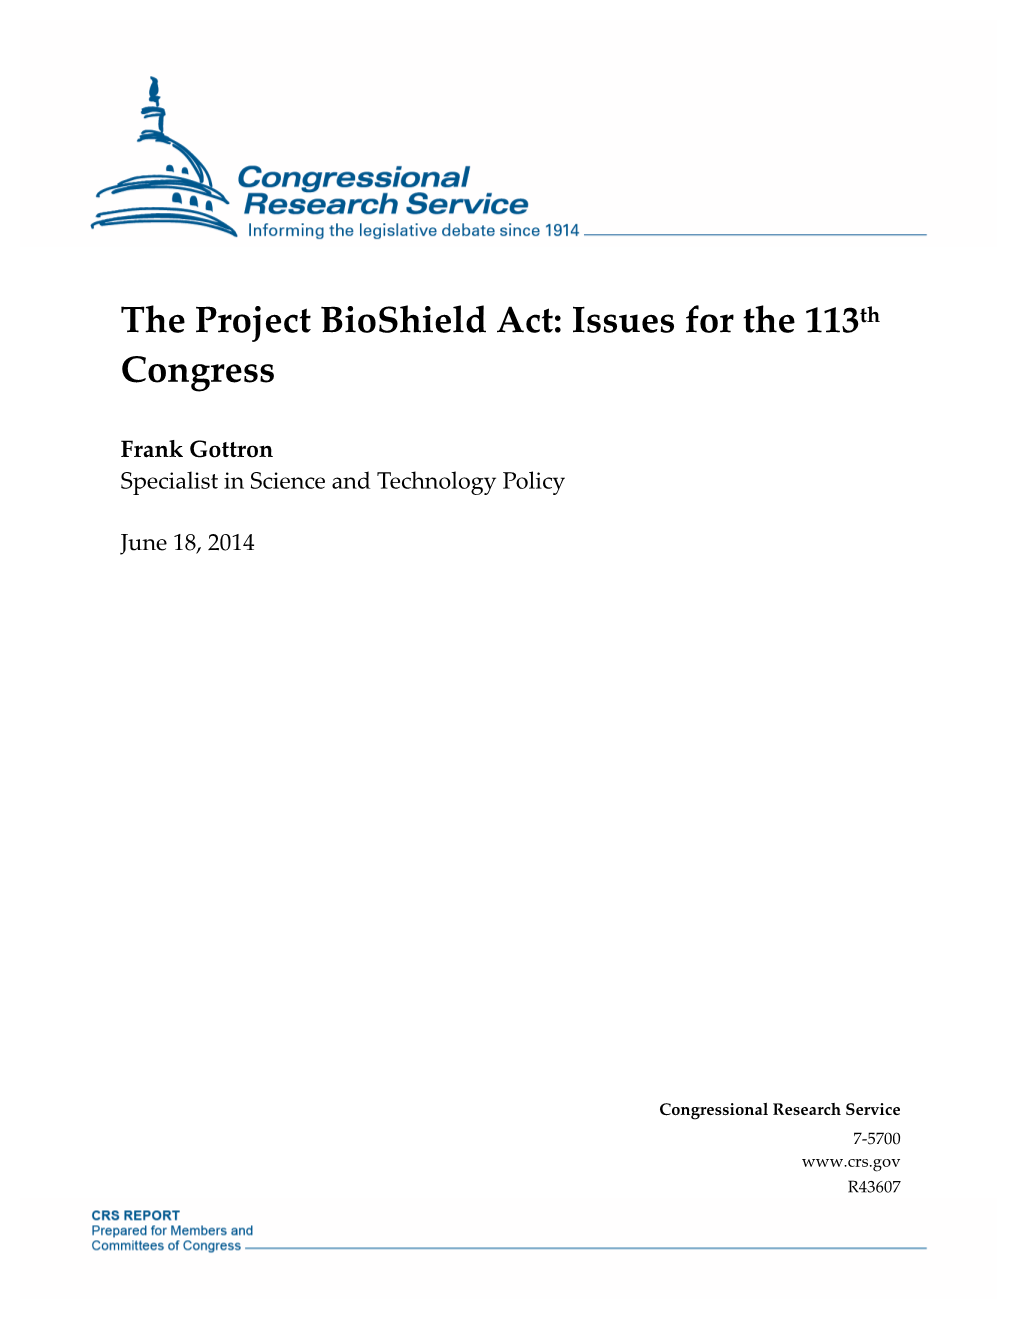 The Project Bioshield Act: Issues for the 113Th Congress